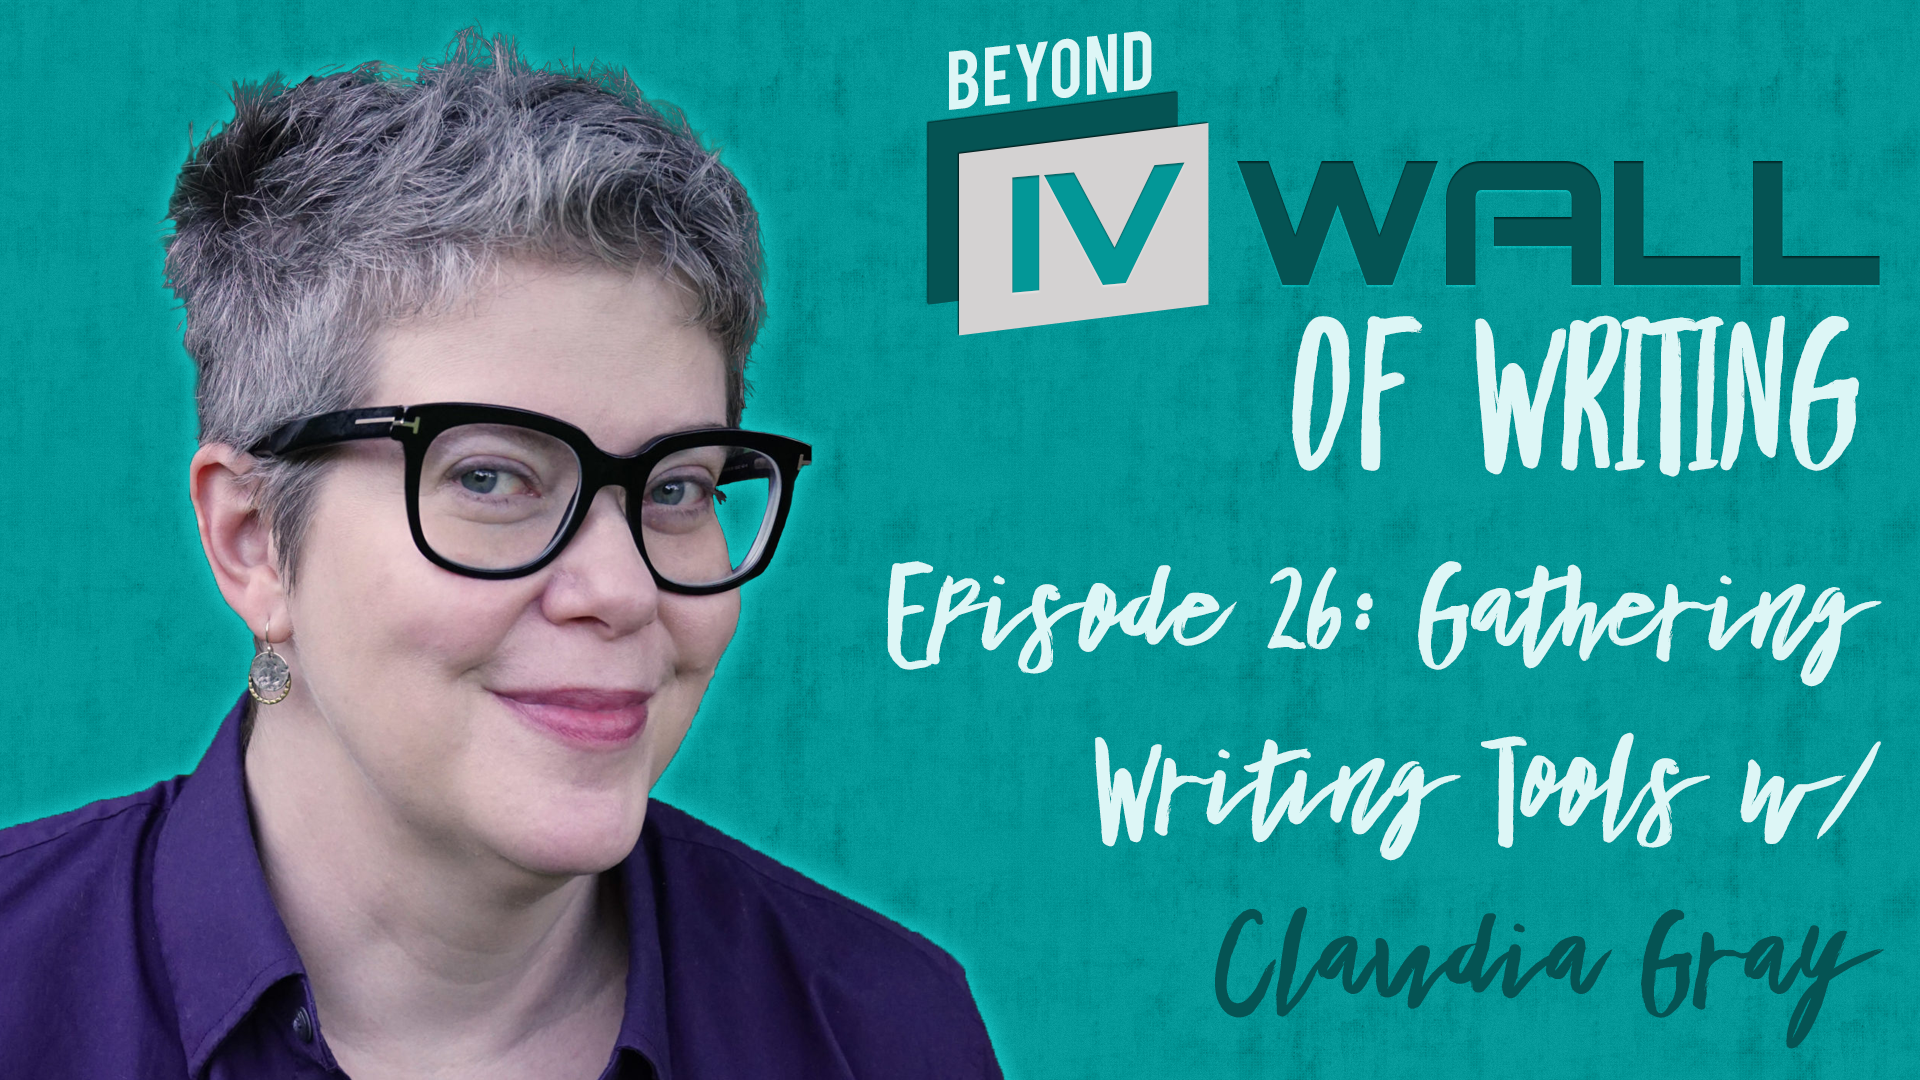 Beyond_IVWall_Episode_26-_Gathering_Writing_Tools_with_Claudia_Gray_Blog.png 